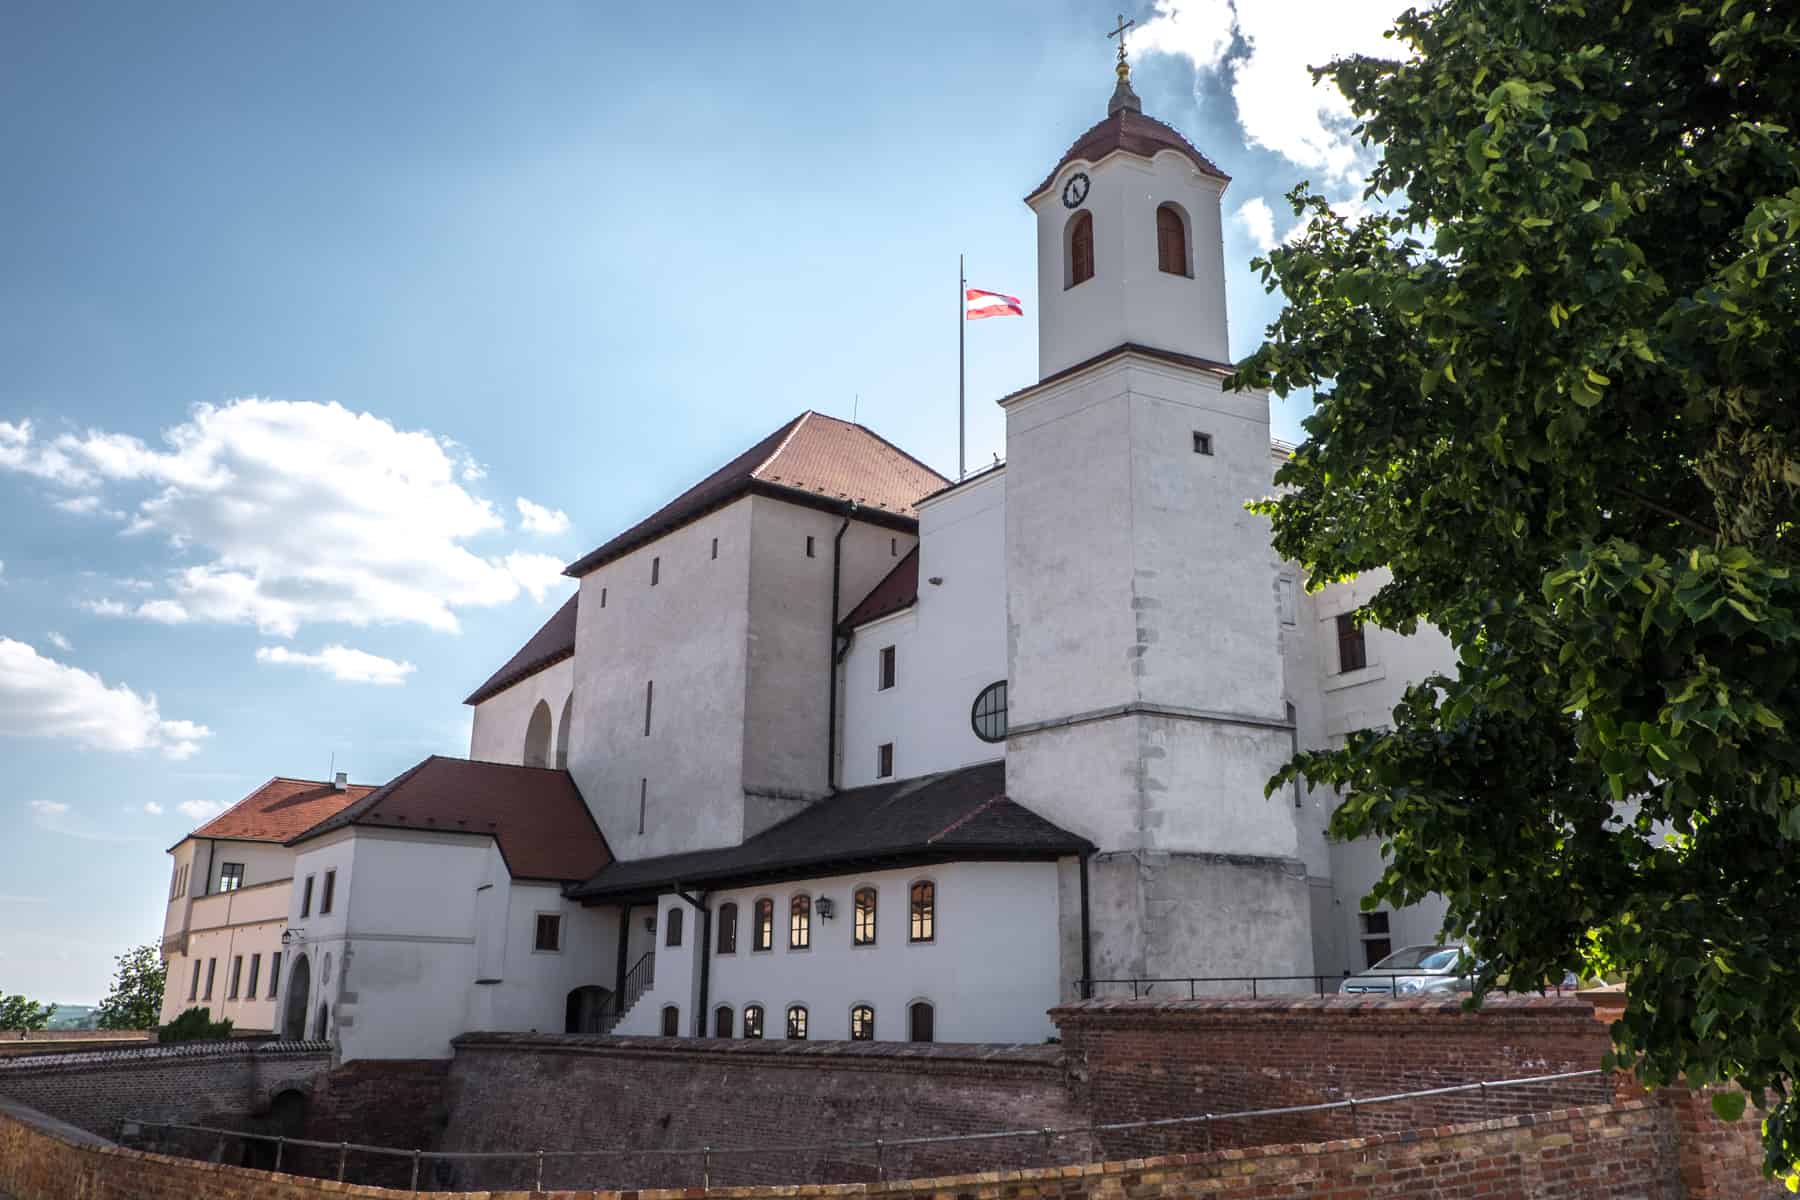 A white medieval castle complex with a red roof and a raised Czech Republic flag.